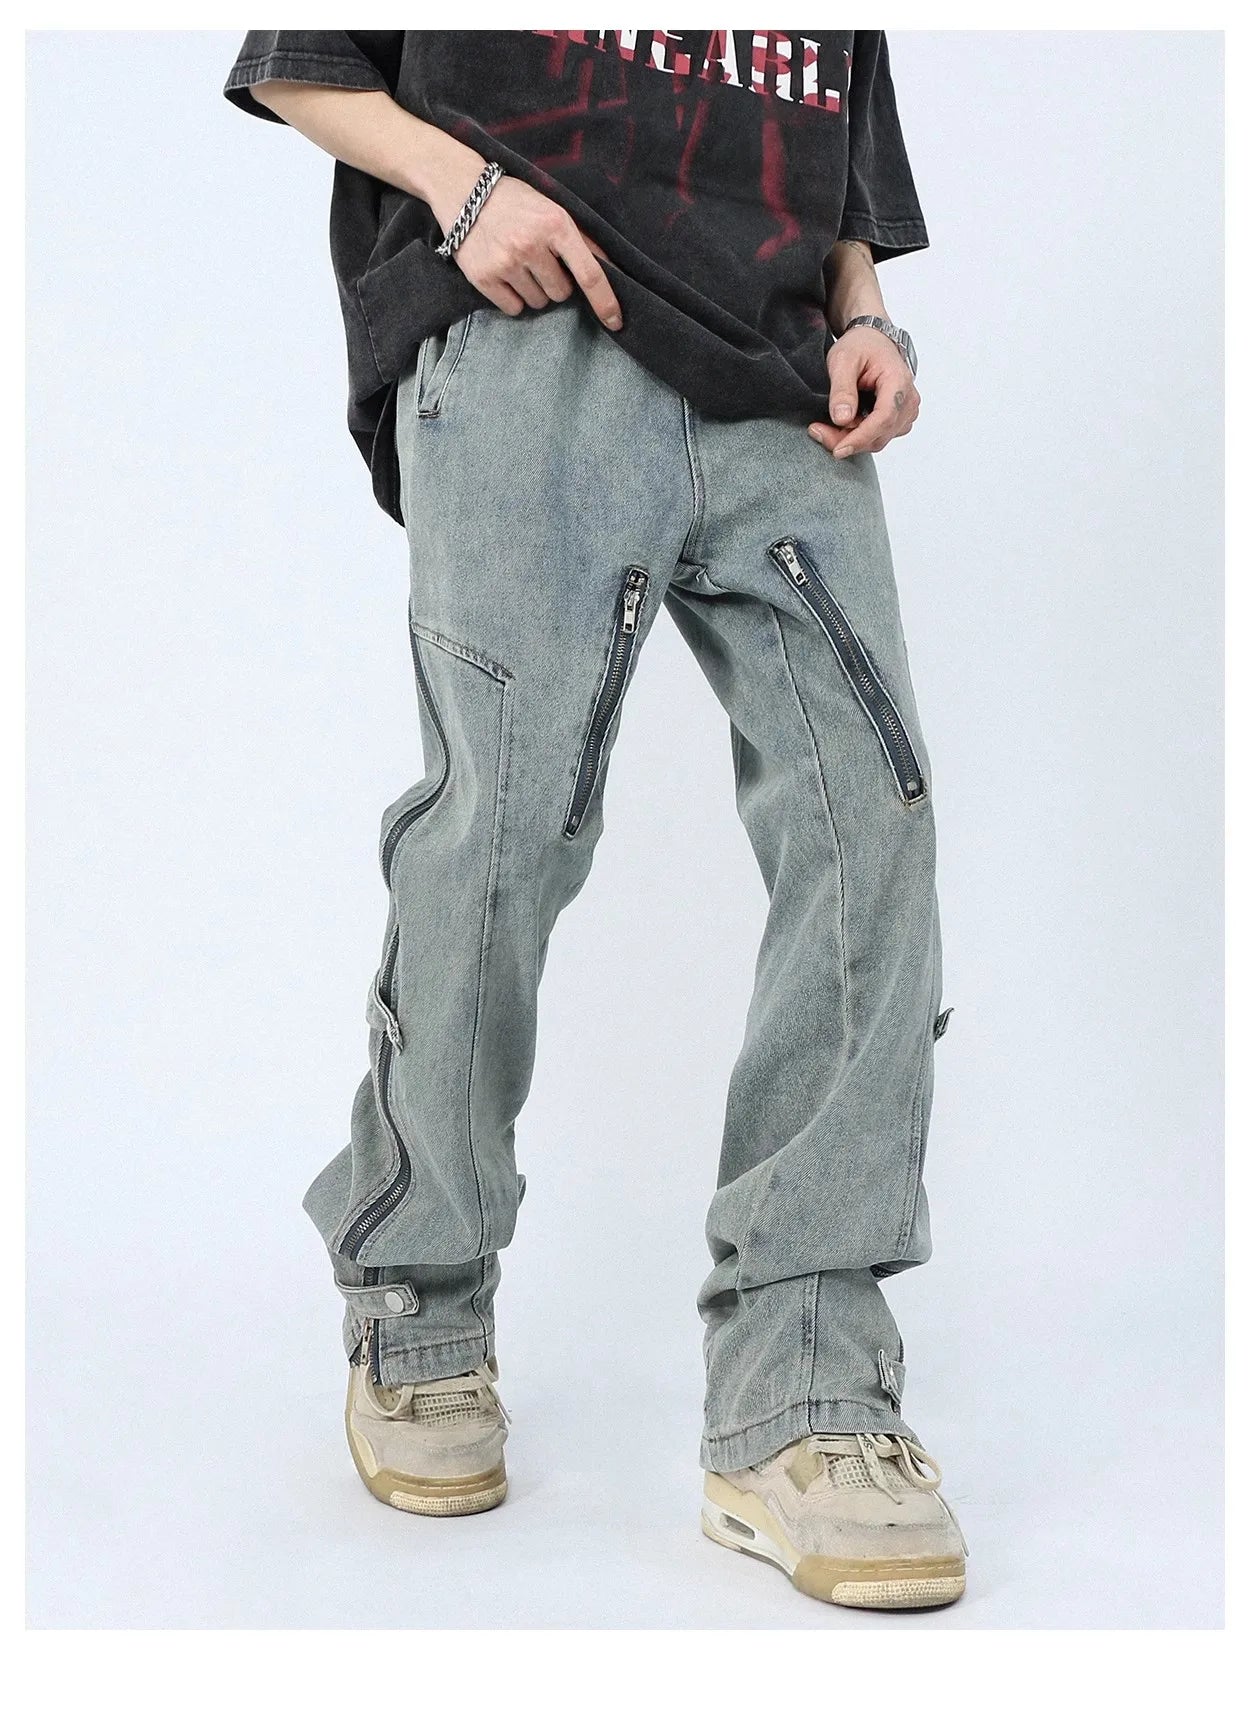 MADE EXTREME Multi-zipper Distressed Jeans